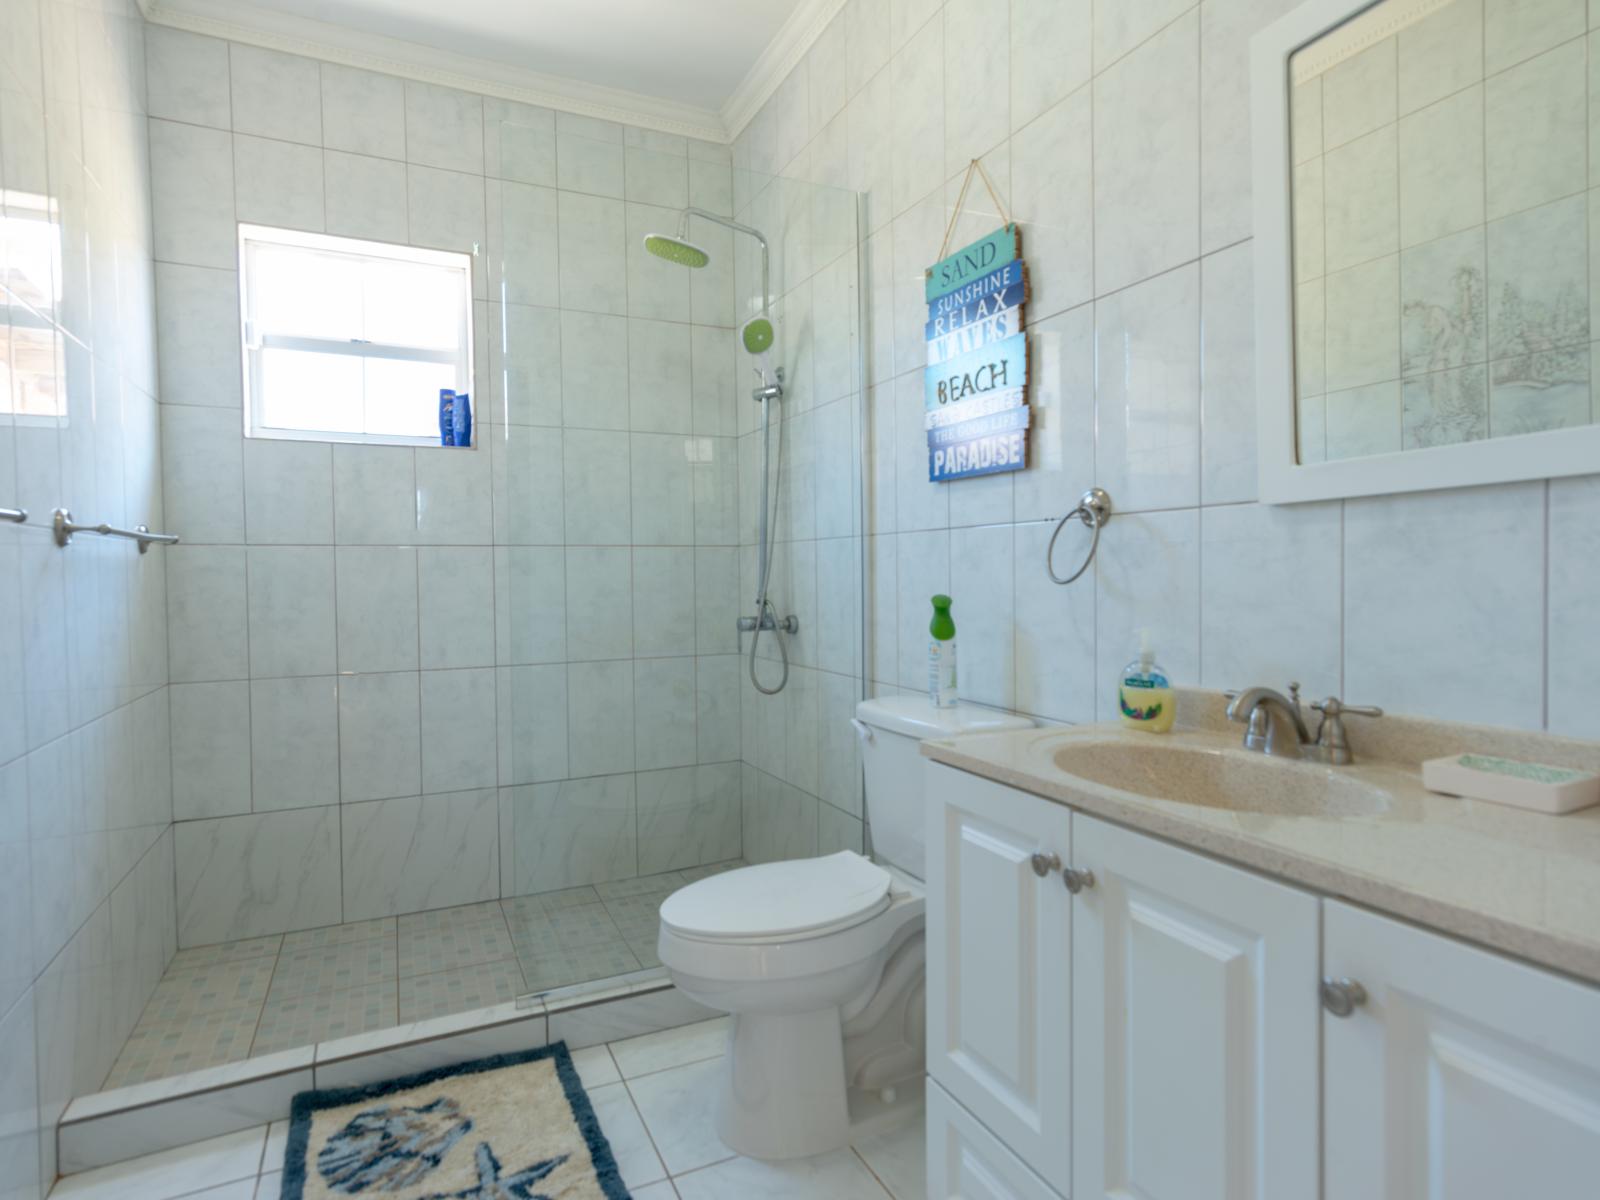 Freshen up and feel rejuvenated in clean and welcoming bathroom of the home in Noord Aruba - Spacious walk-in shower area and bathroom essentials for your convenience - Elegance meets functionality in thoughtfully appointed bathroom